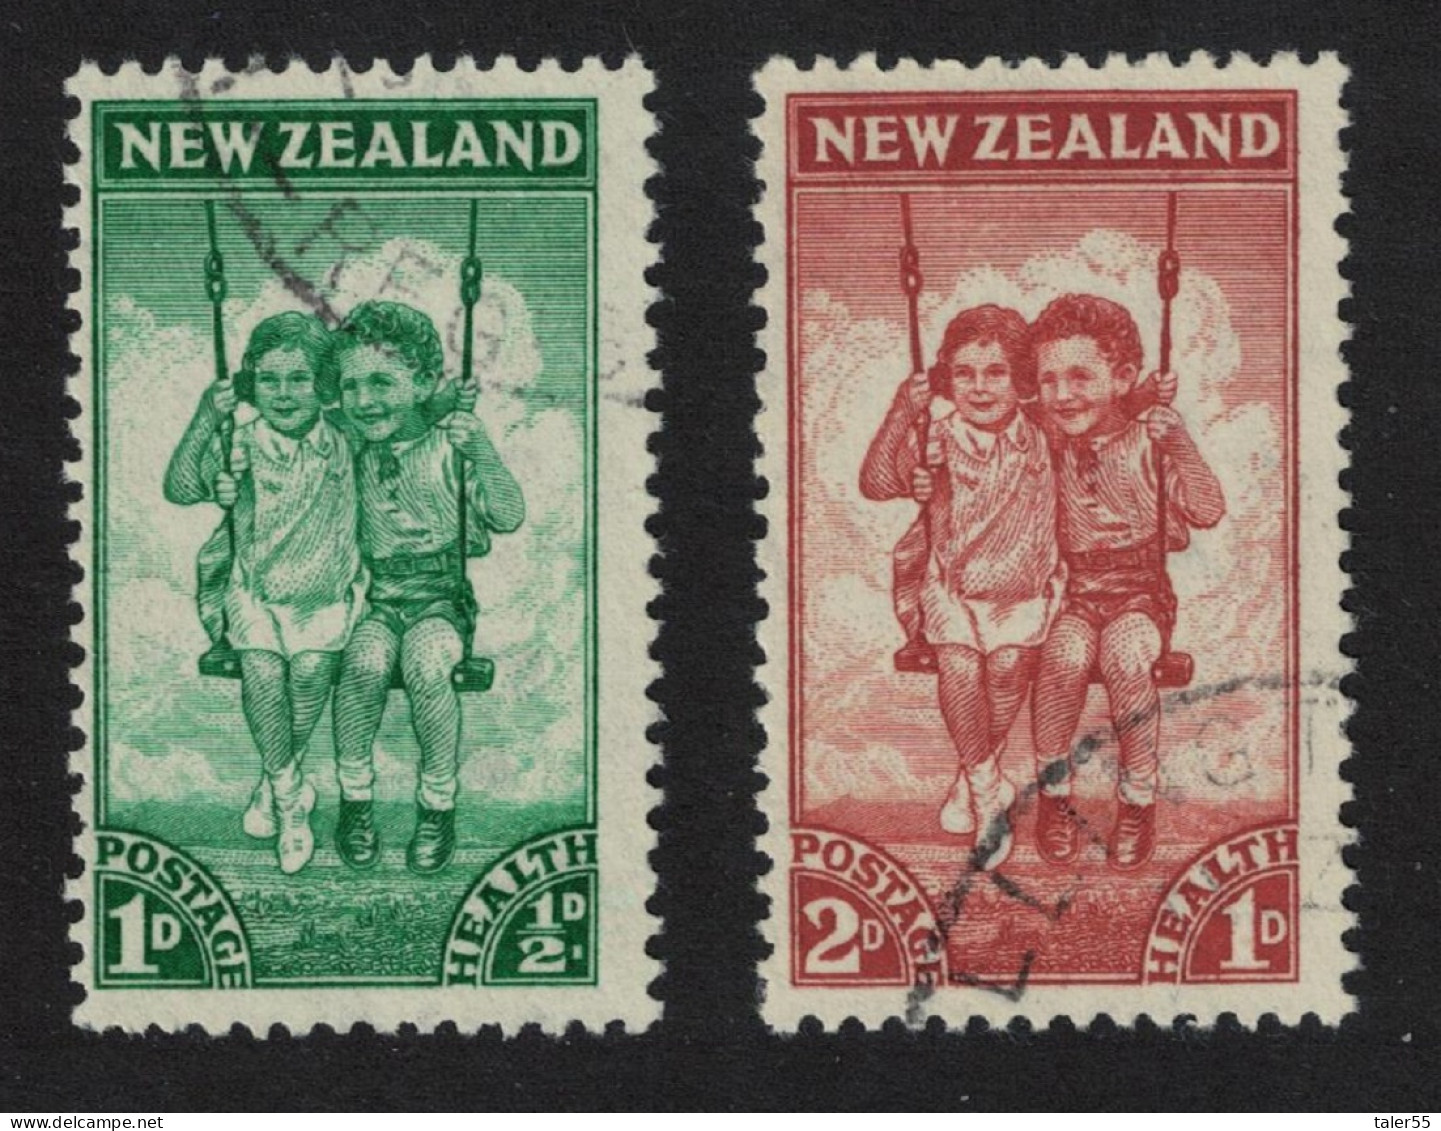 New Zealand Boy And Girl On Swing Health Stamps 1942 Canc SG#634-635 - Used Stamps